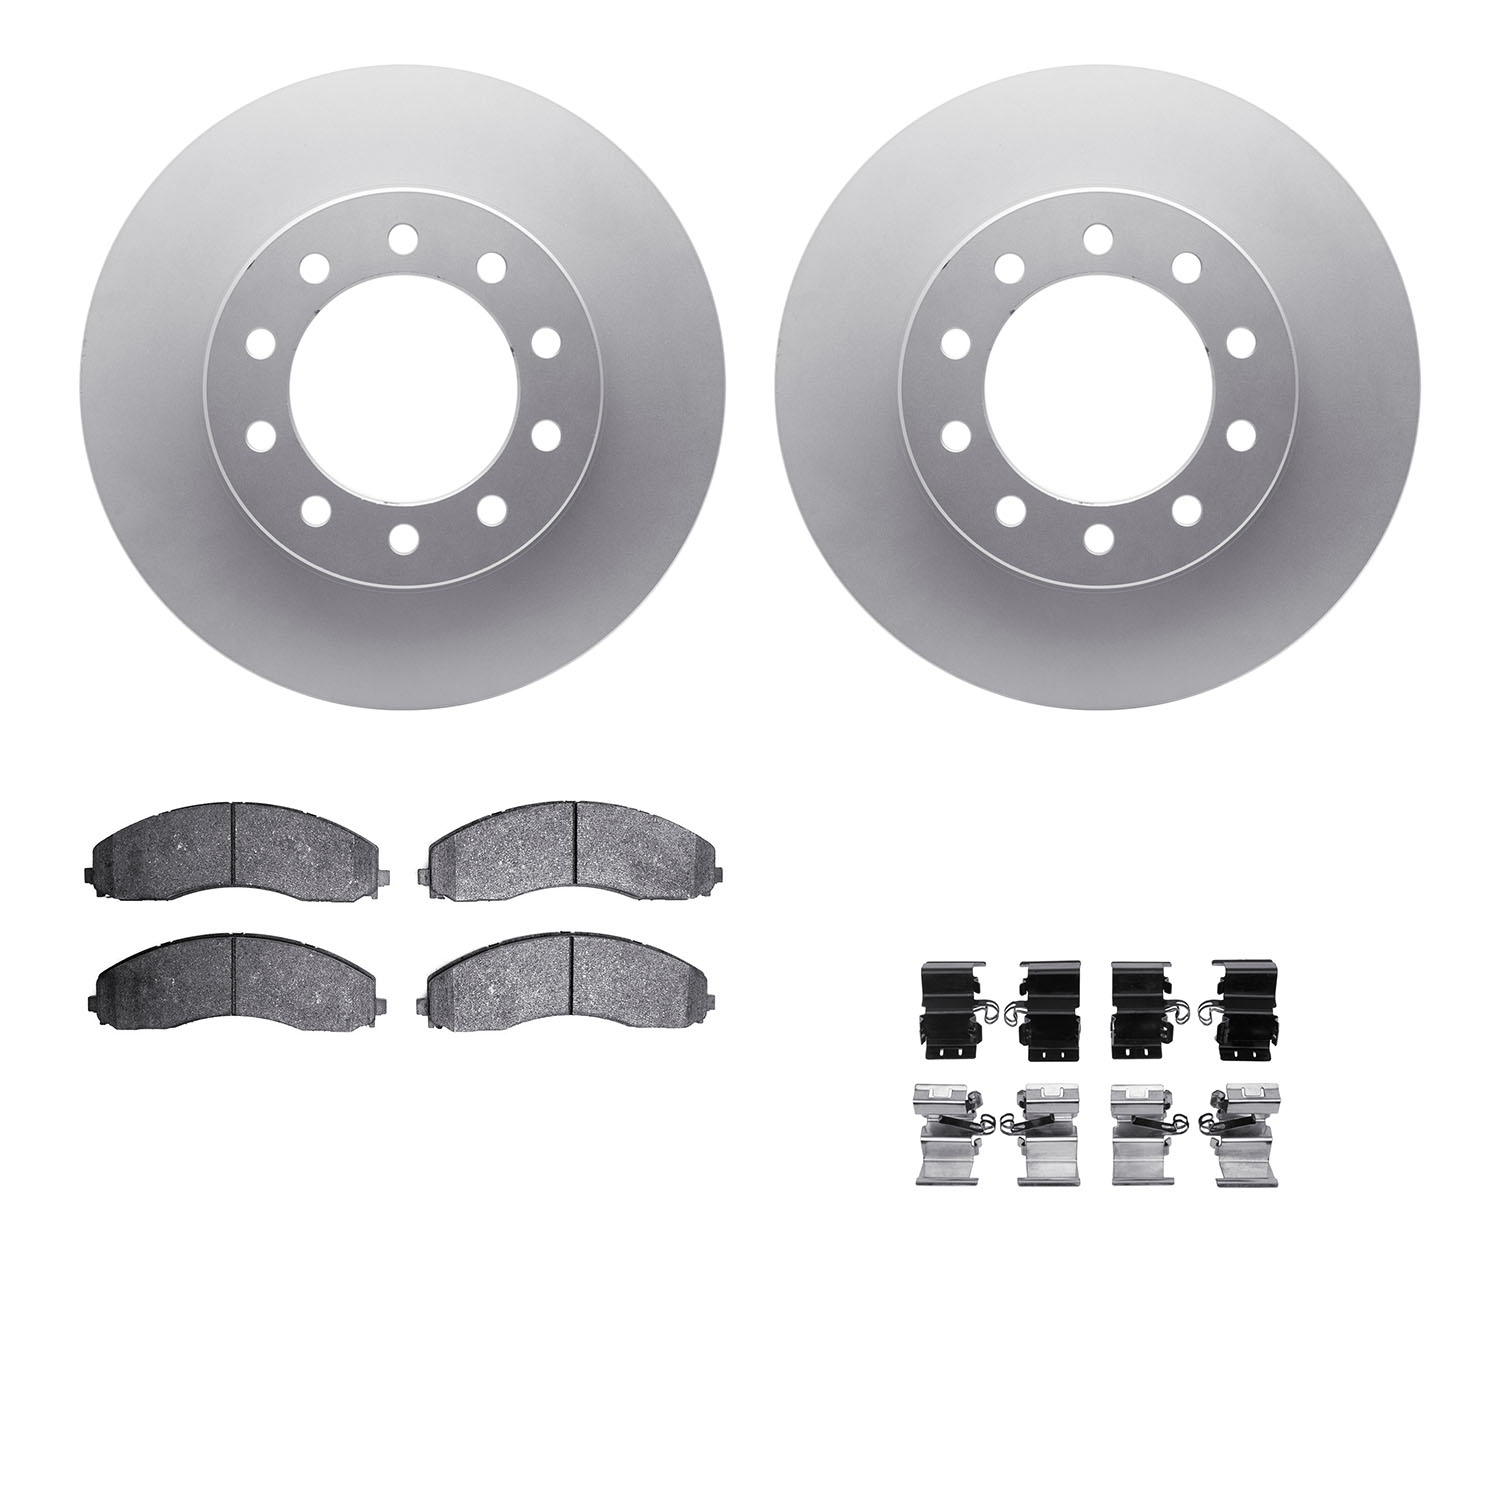 4412-54078 Geospec Brake Rotors with Ultimate-Duty Brake Pads & Hardware, Fits Select Ford/Lincoln/Mercury/Mazda, Position: Fron